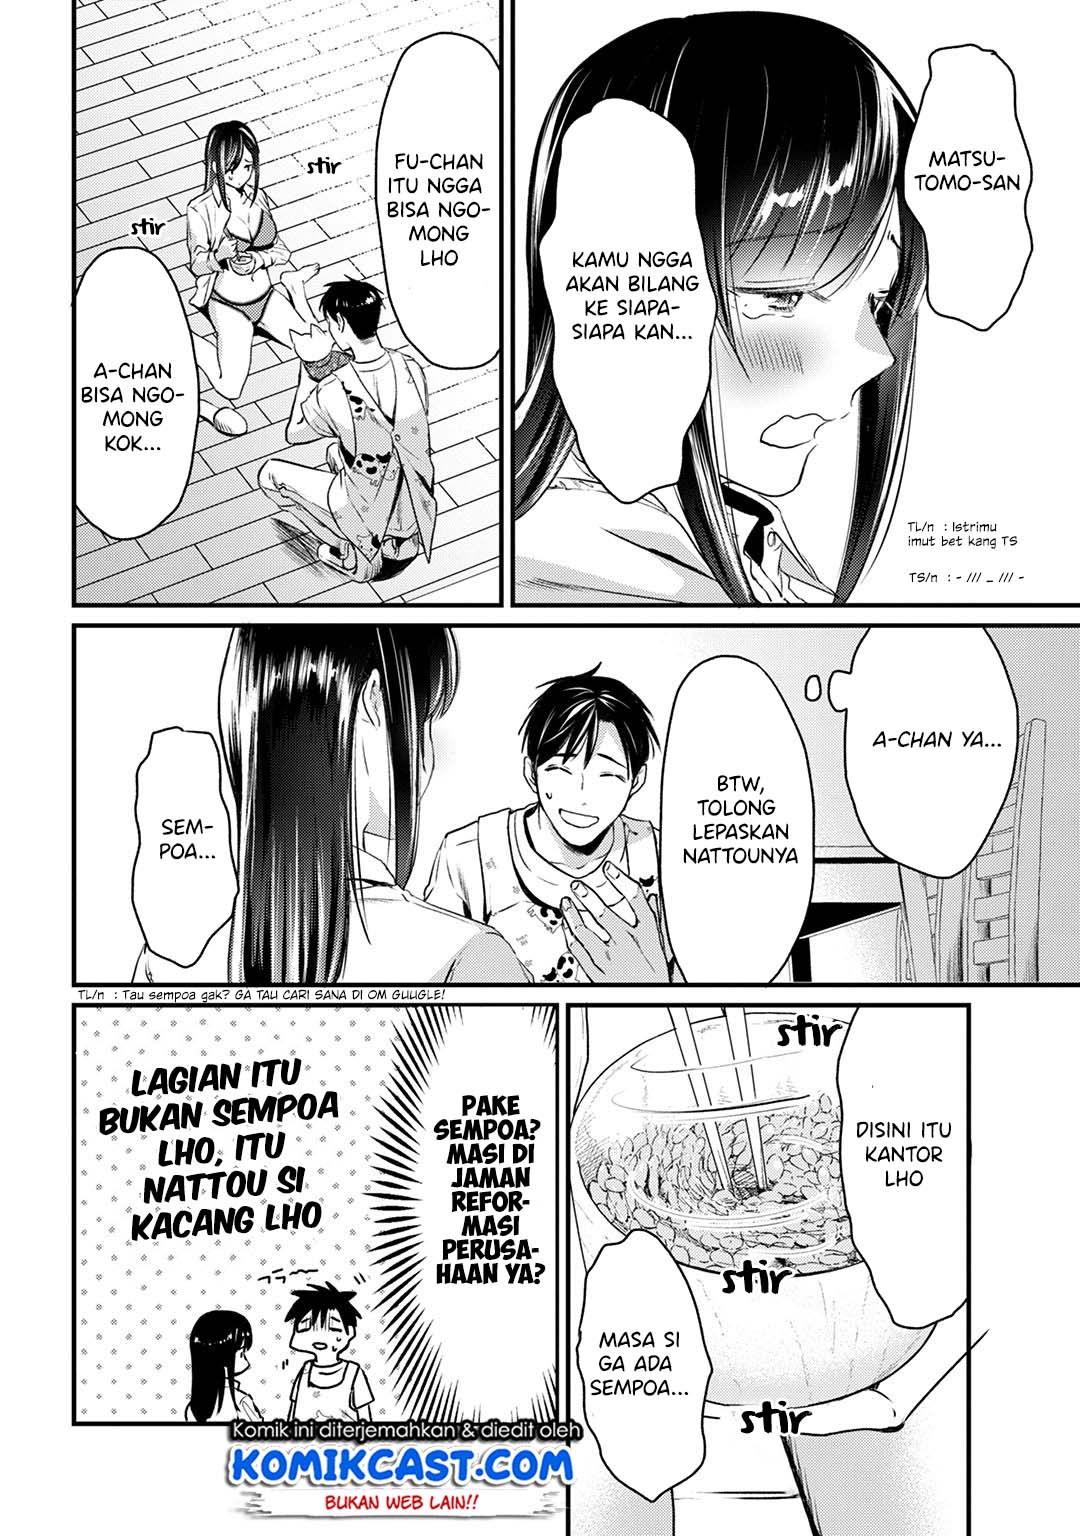 It’s Fun Having a 300,000 yen a Month Job Welcoming Home an Onee-san Who Doesn’t Find Meaning in a Job That Pays Her 500,000 yen a Month Chapter 5